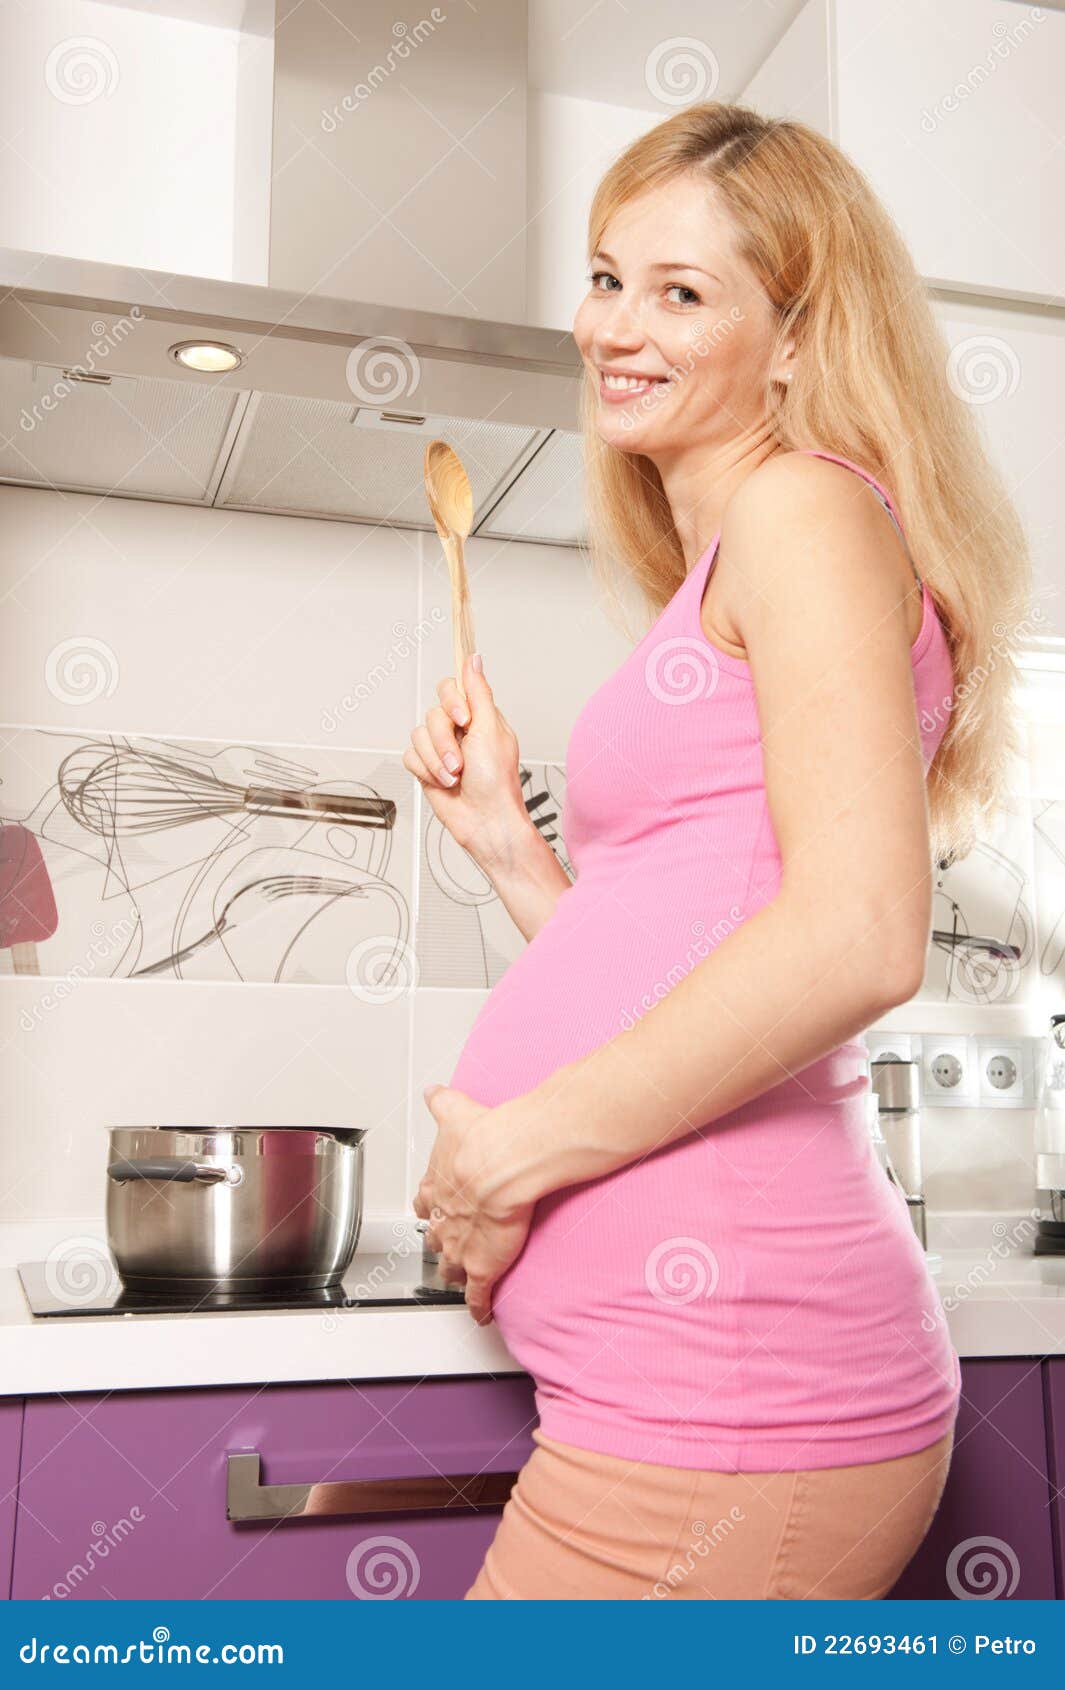 Pregnant Cooking Stock Image - Image: 22693461